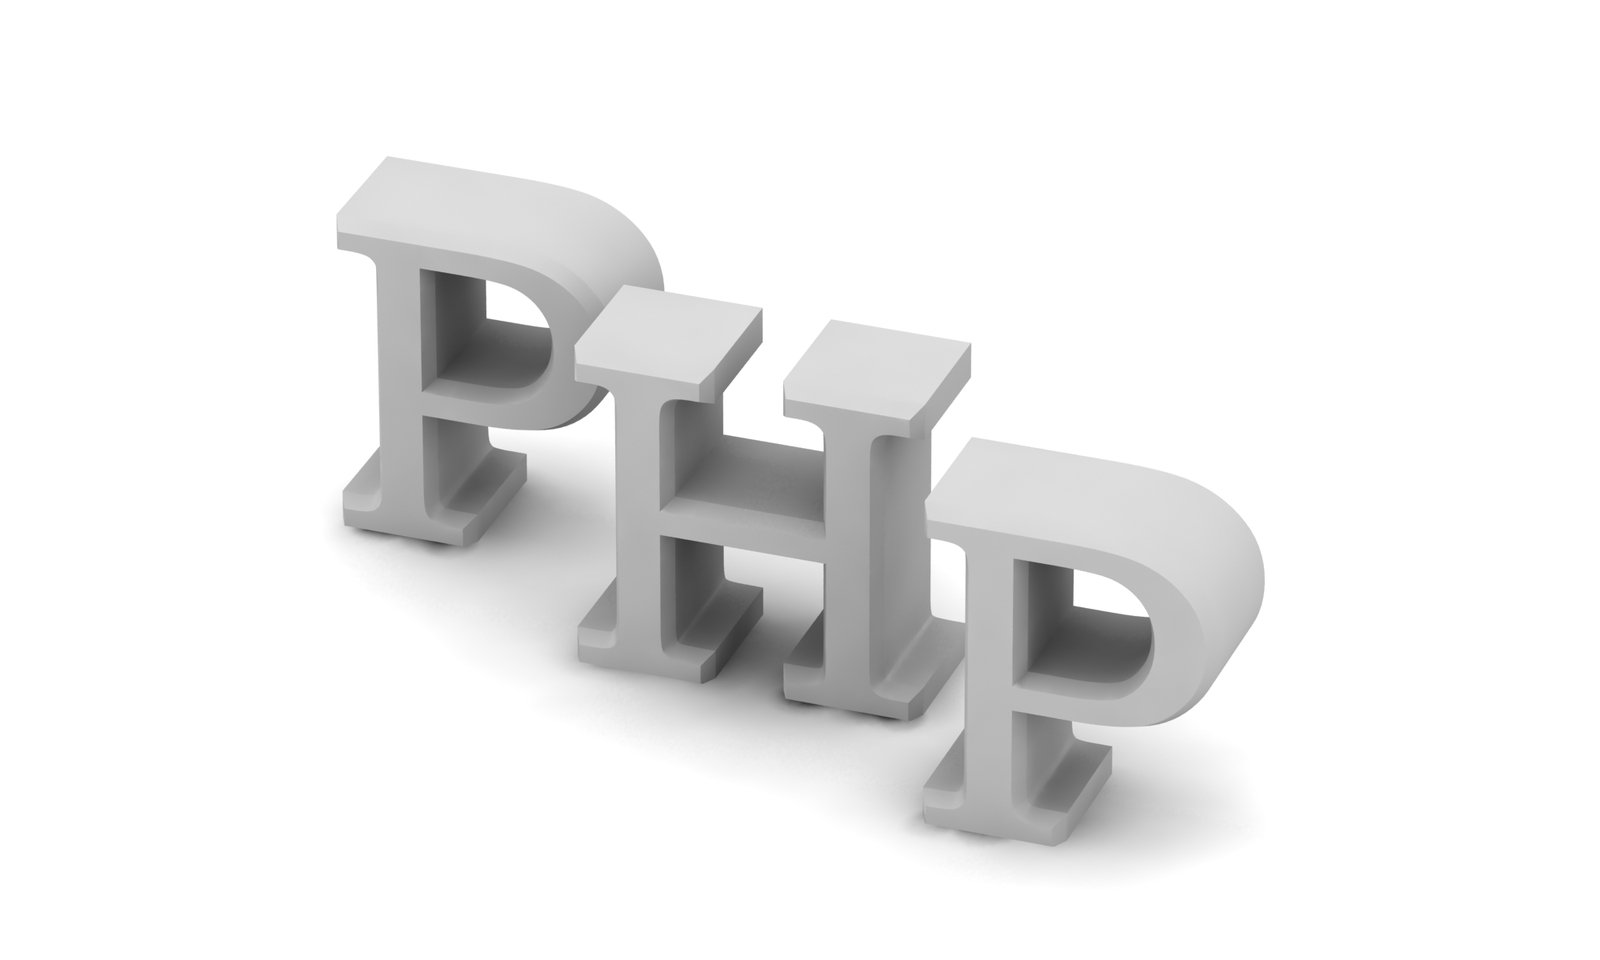 PHP Introduction